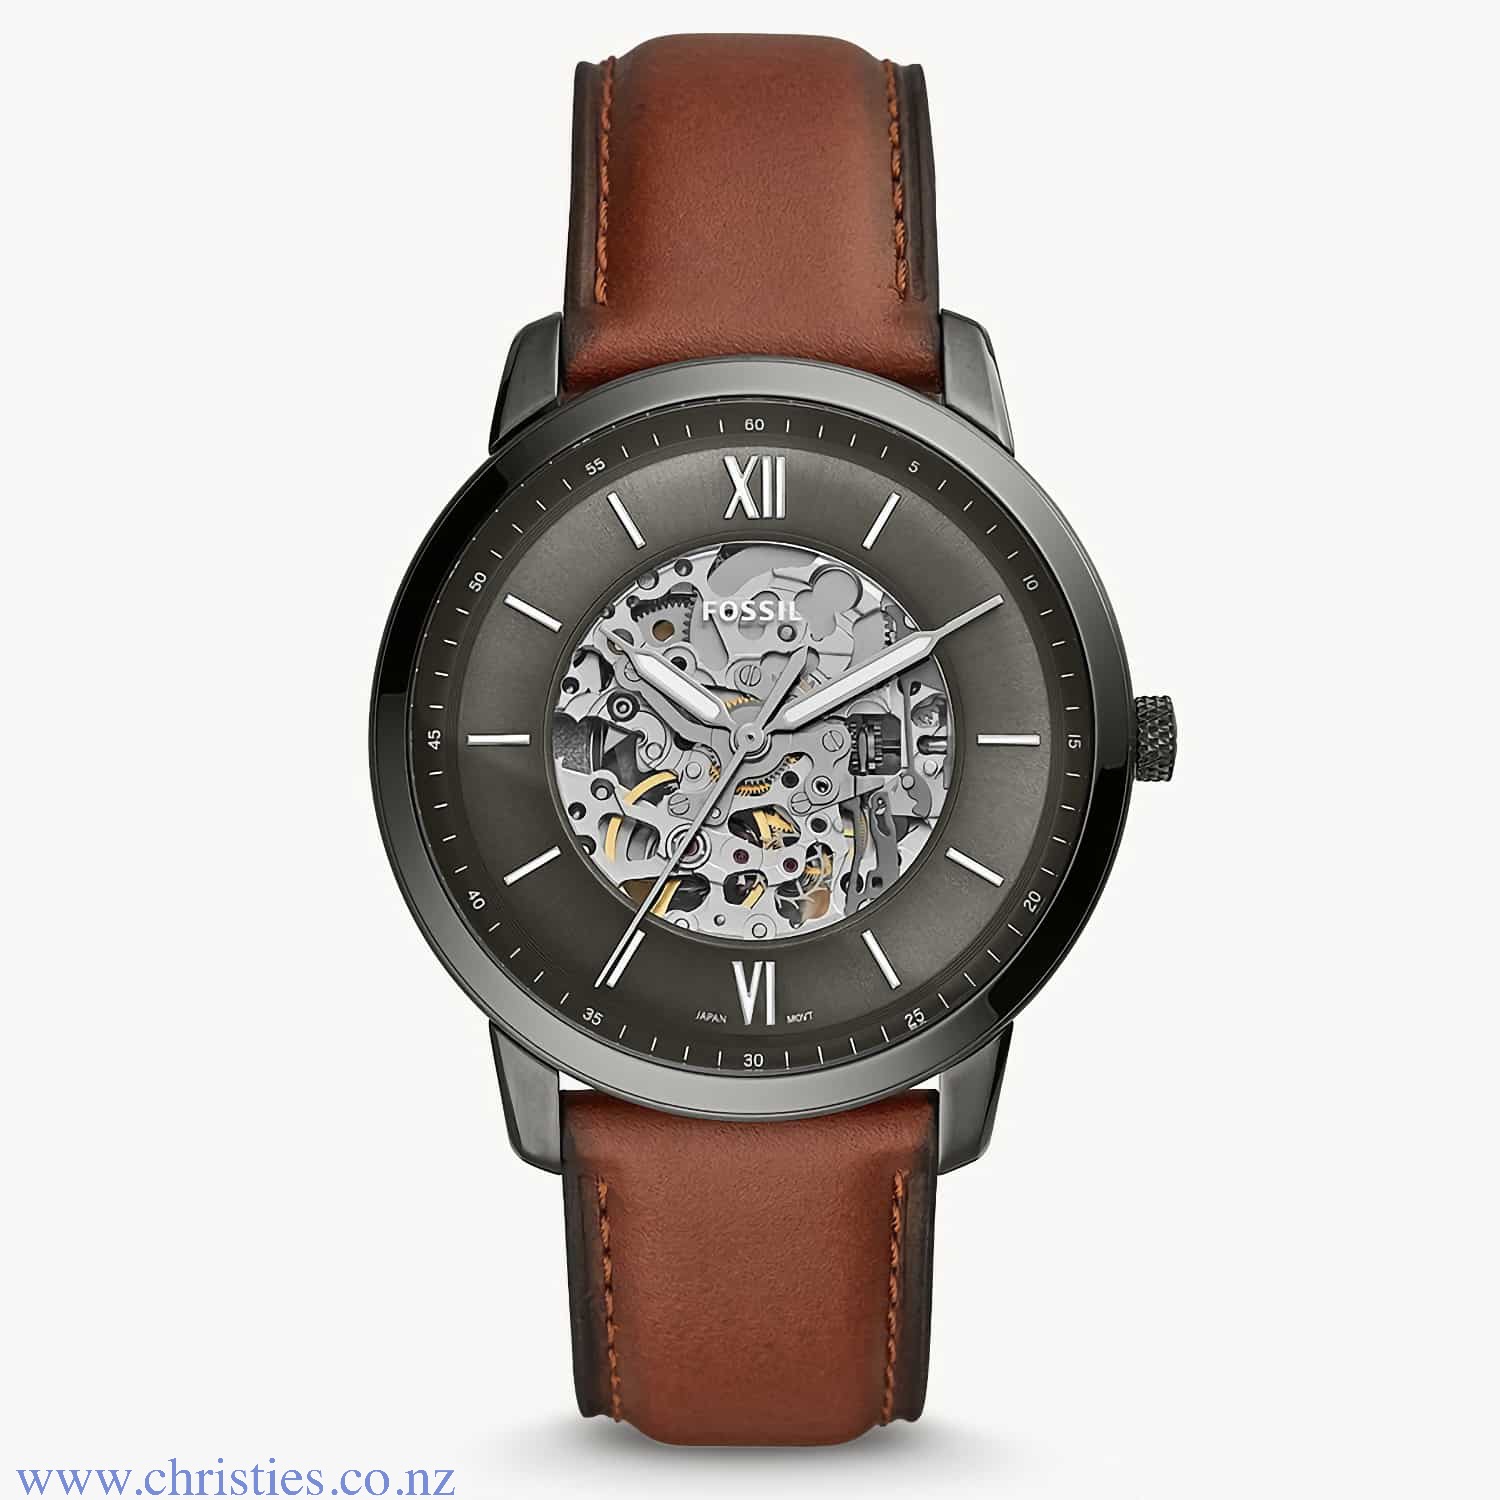 ME3161 Fossil Neutra Automatic Amber Leather Watch. ME3161 Fossil Neutra Automatic Amber Leather Watch LAYBUY - Pay it easy, in 6 weekly payments and have it now. Only pay the price of your purchase, when you pay your instalments on time. A late fee may b